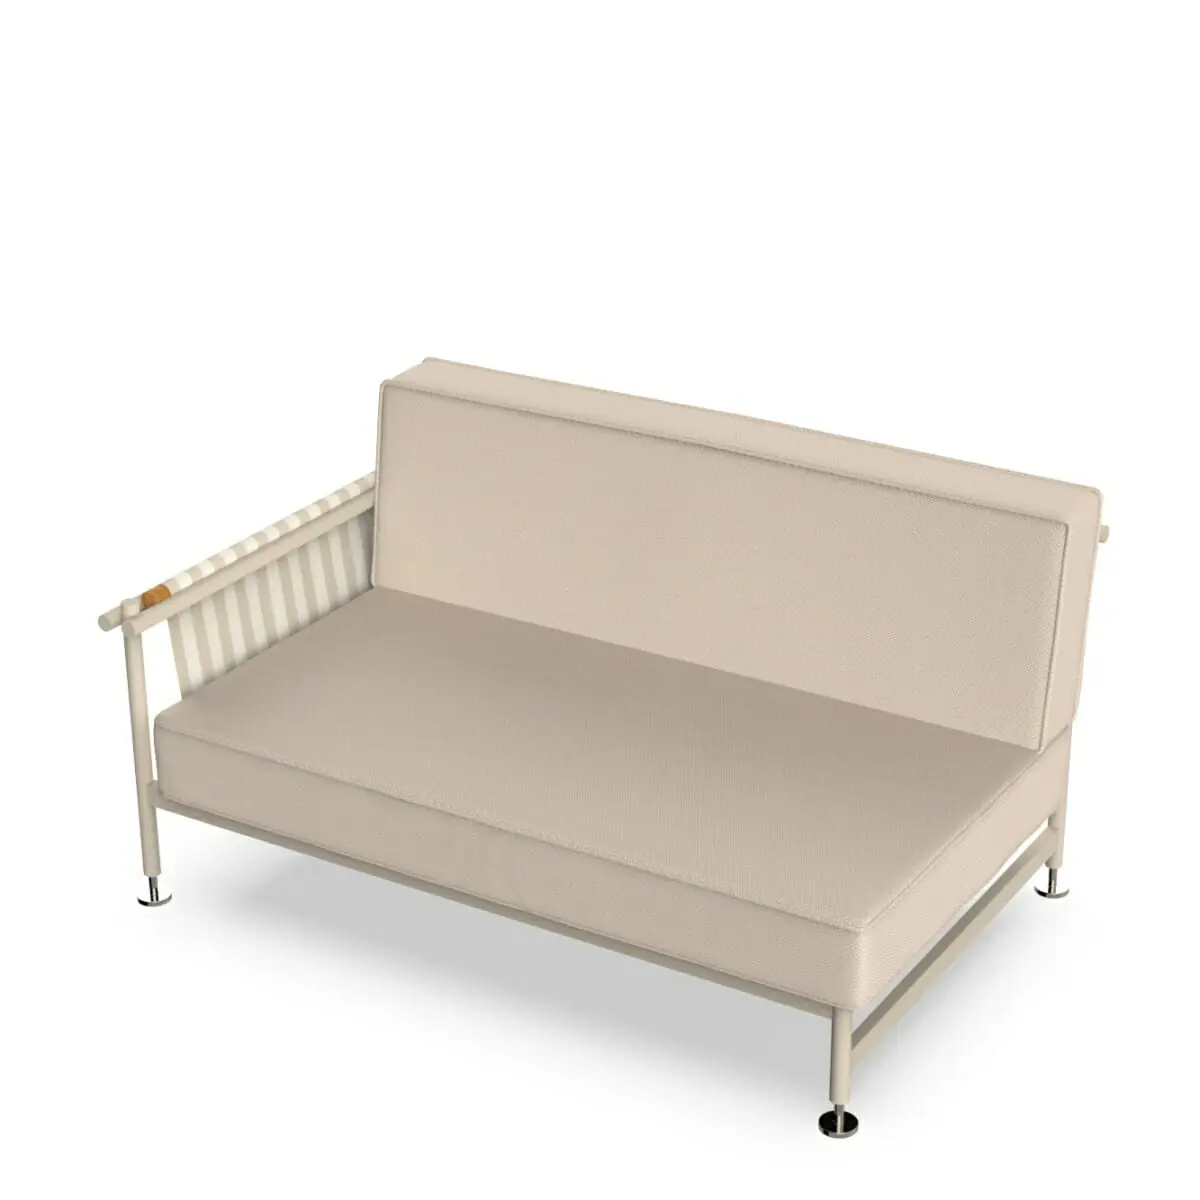 84564-83480-hamptons-outdoor-furniture-collection